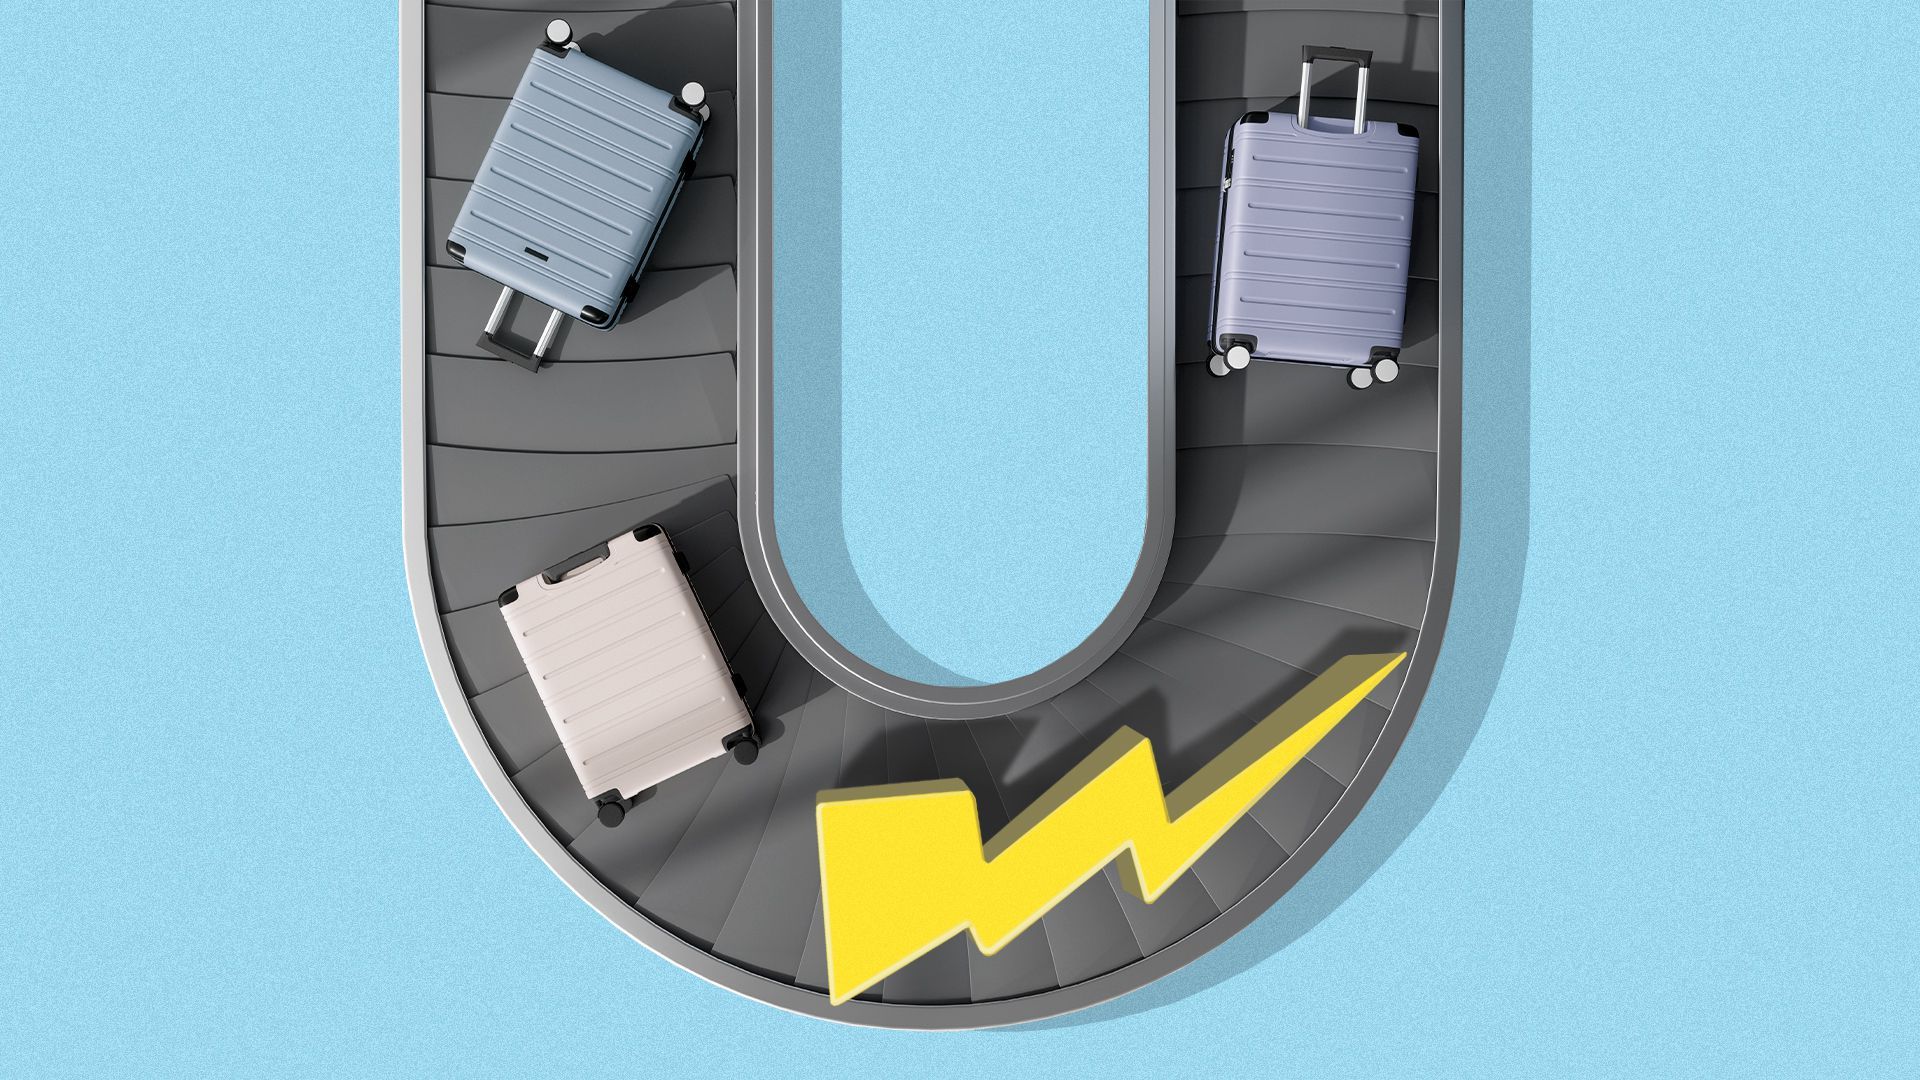 Illustration of a luggage conveyor belt with a lightning bolt among the suitcases